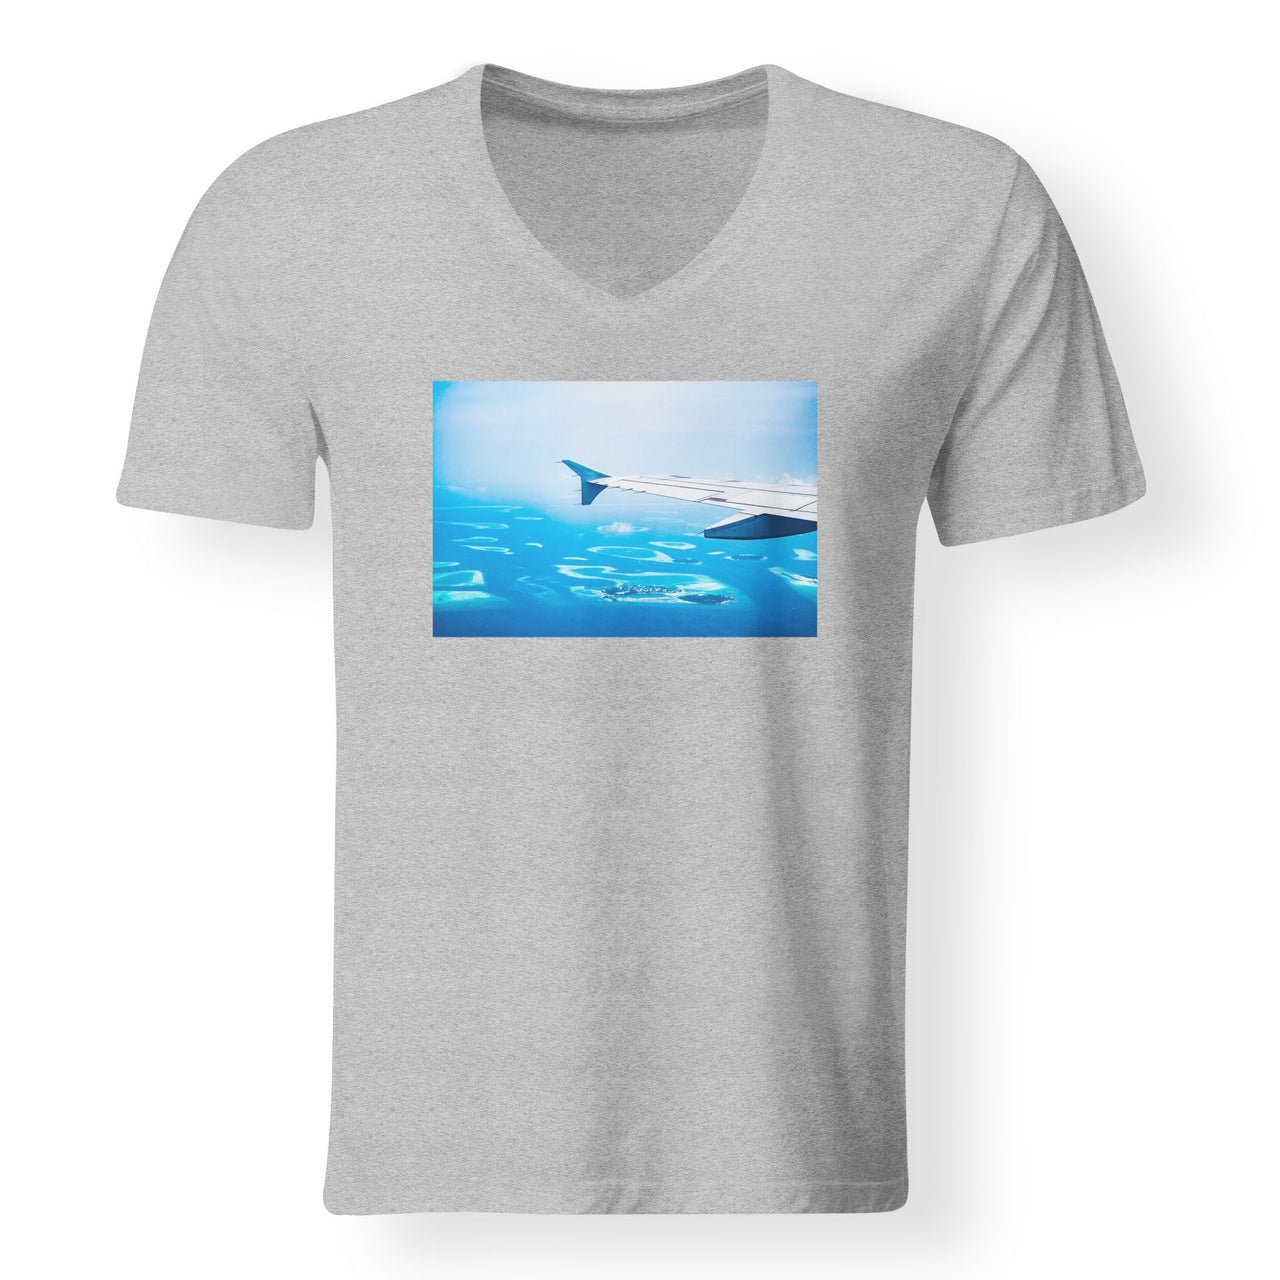 Outstanding View Through Airplane Wing Designed V-Neck T-Shirts